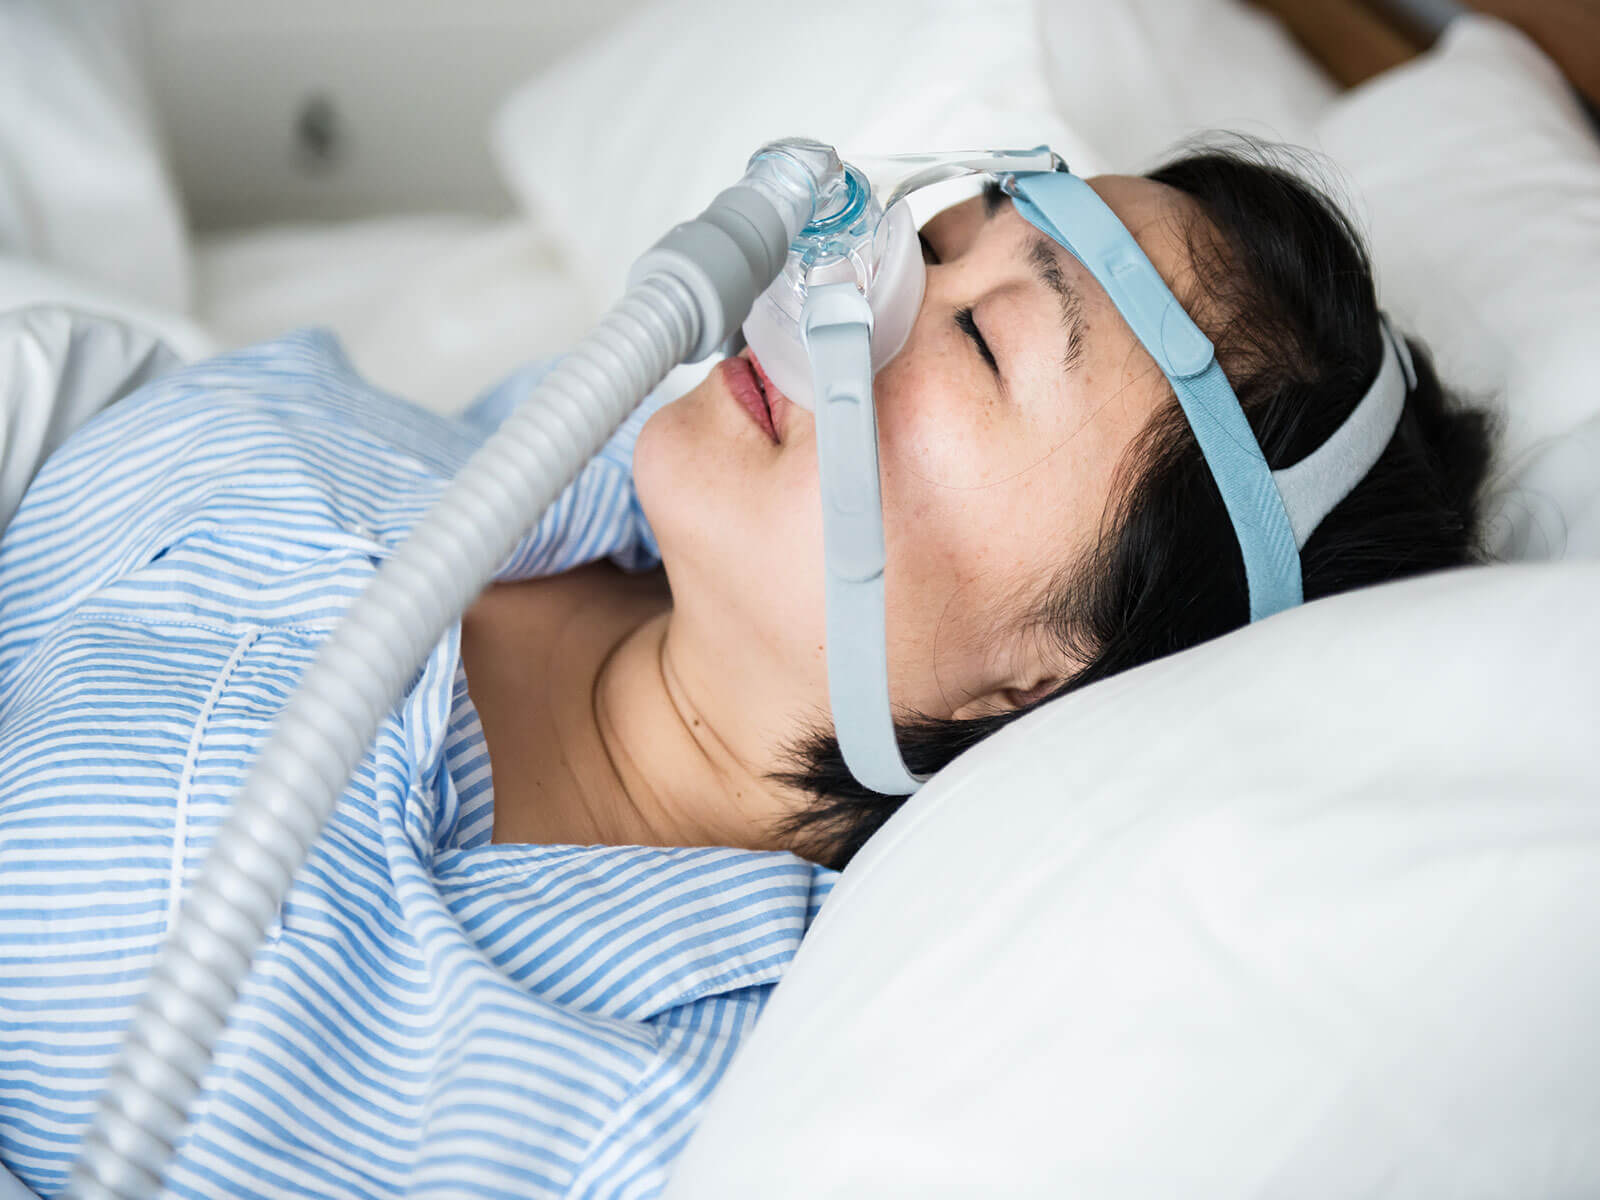 How Can Sleep Apnea Be Treated Without CPAP?